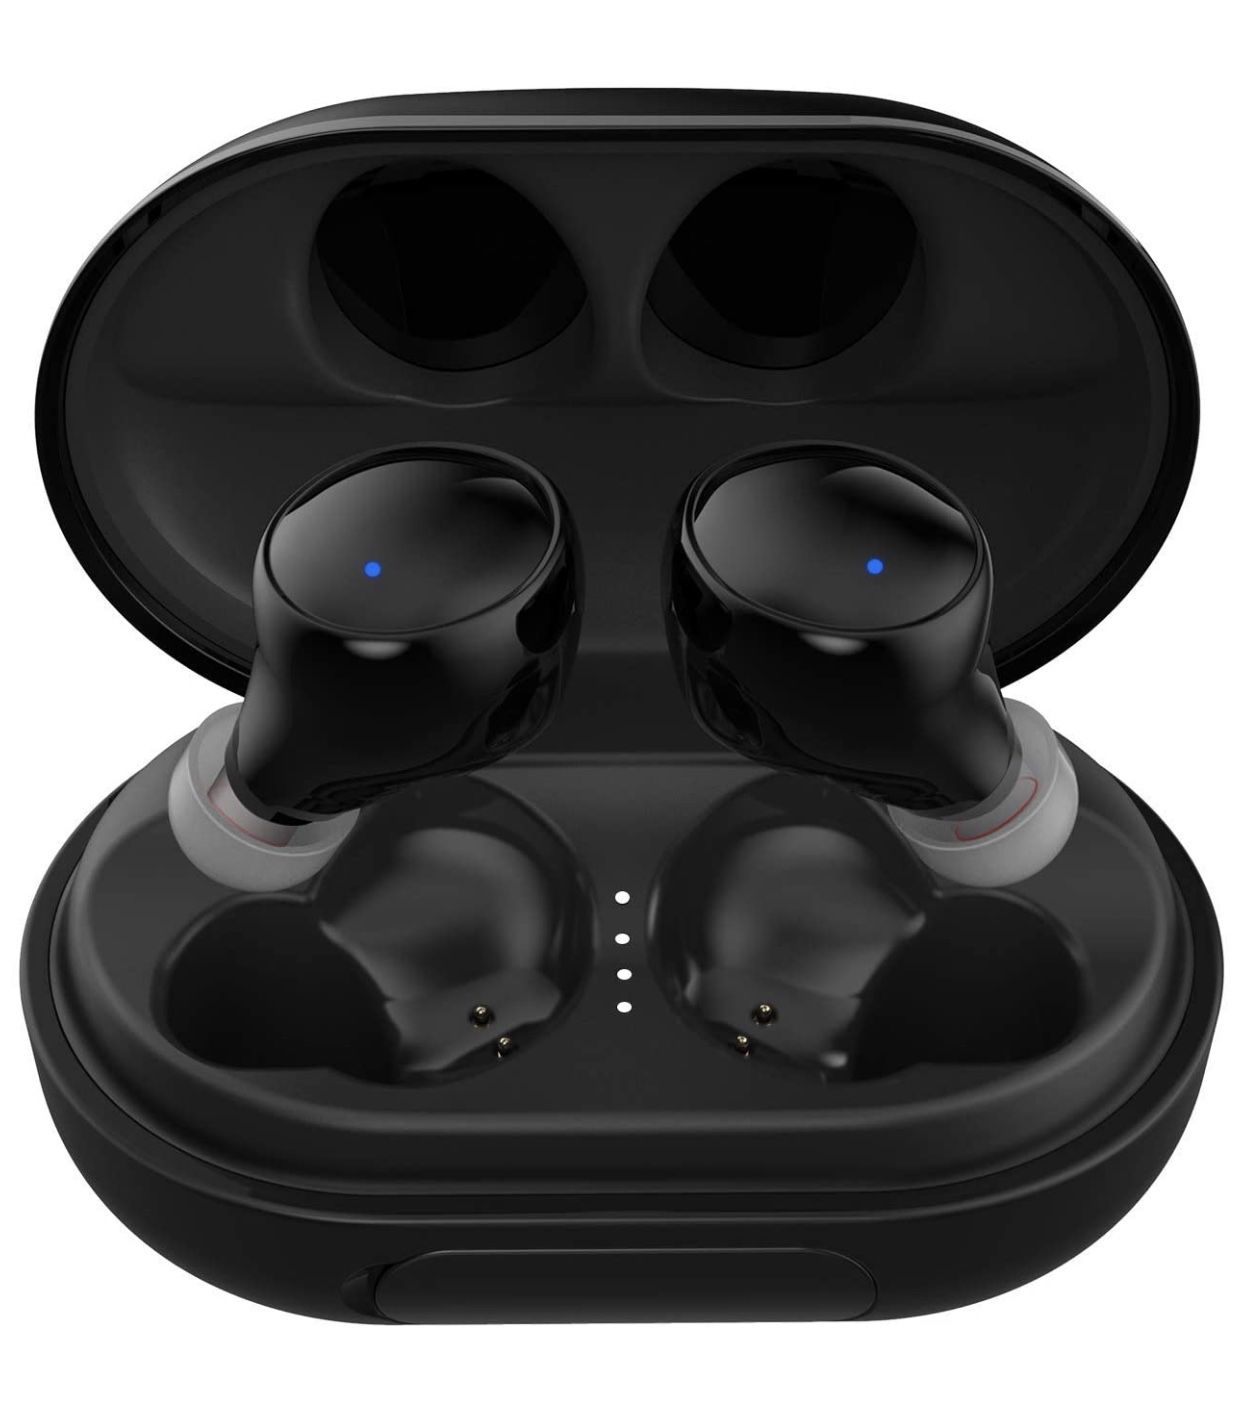 Brand New Wireless Earbuds TWS 3D Stereo Sound Bluetooth Headphones Mini in-Ear Wireless Earphone Built-in Mic, with 3000mAh Charging Case 110 Hrs Pl